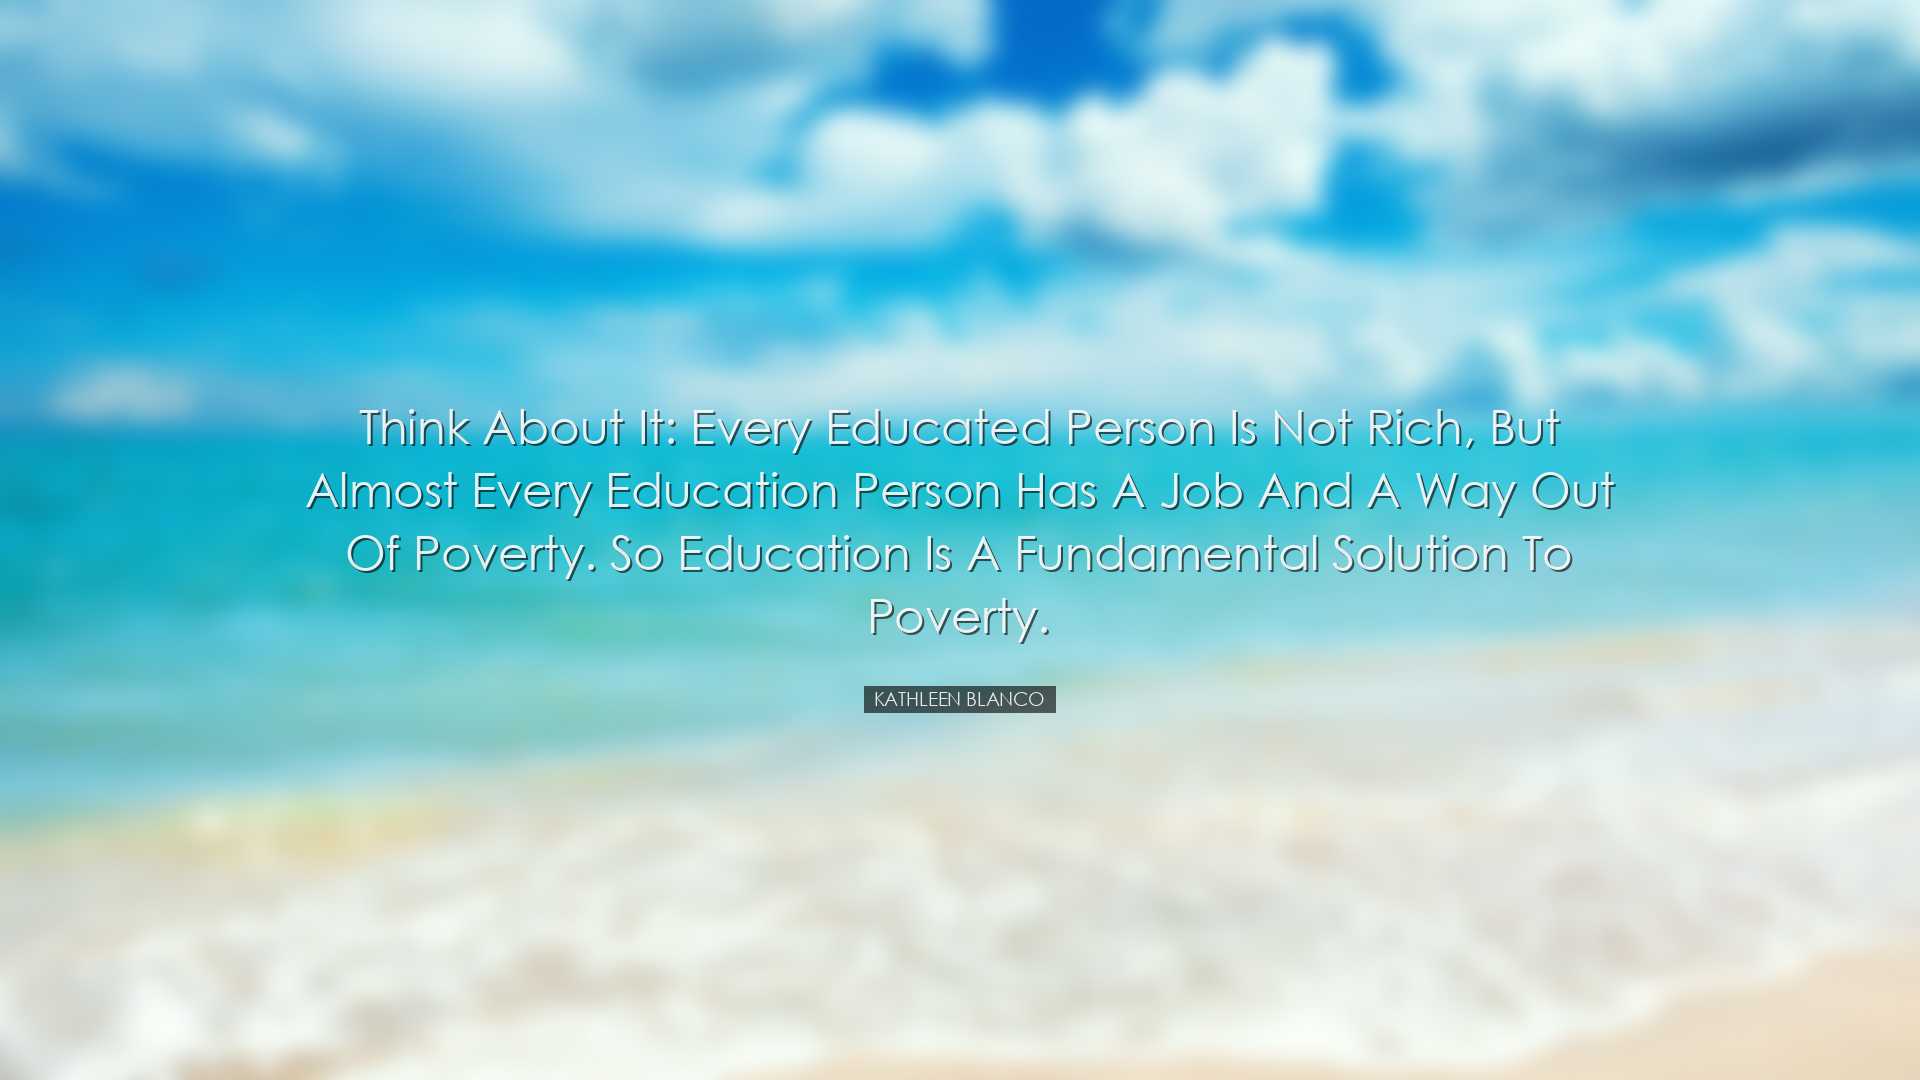 Think about it: Every educated person is not rich, but almost ever